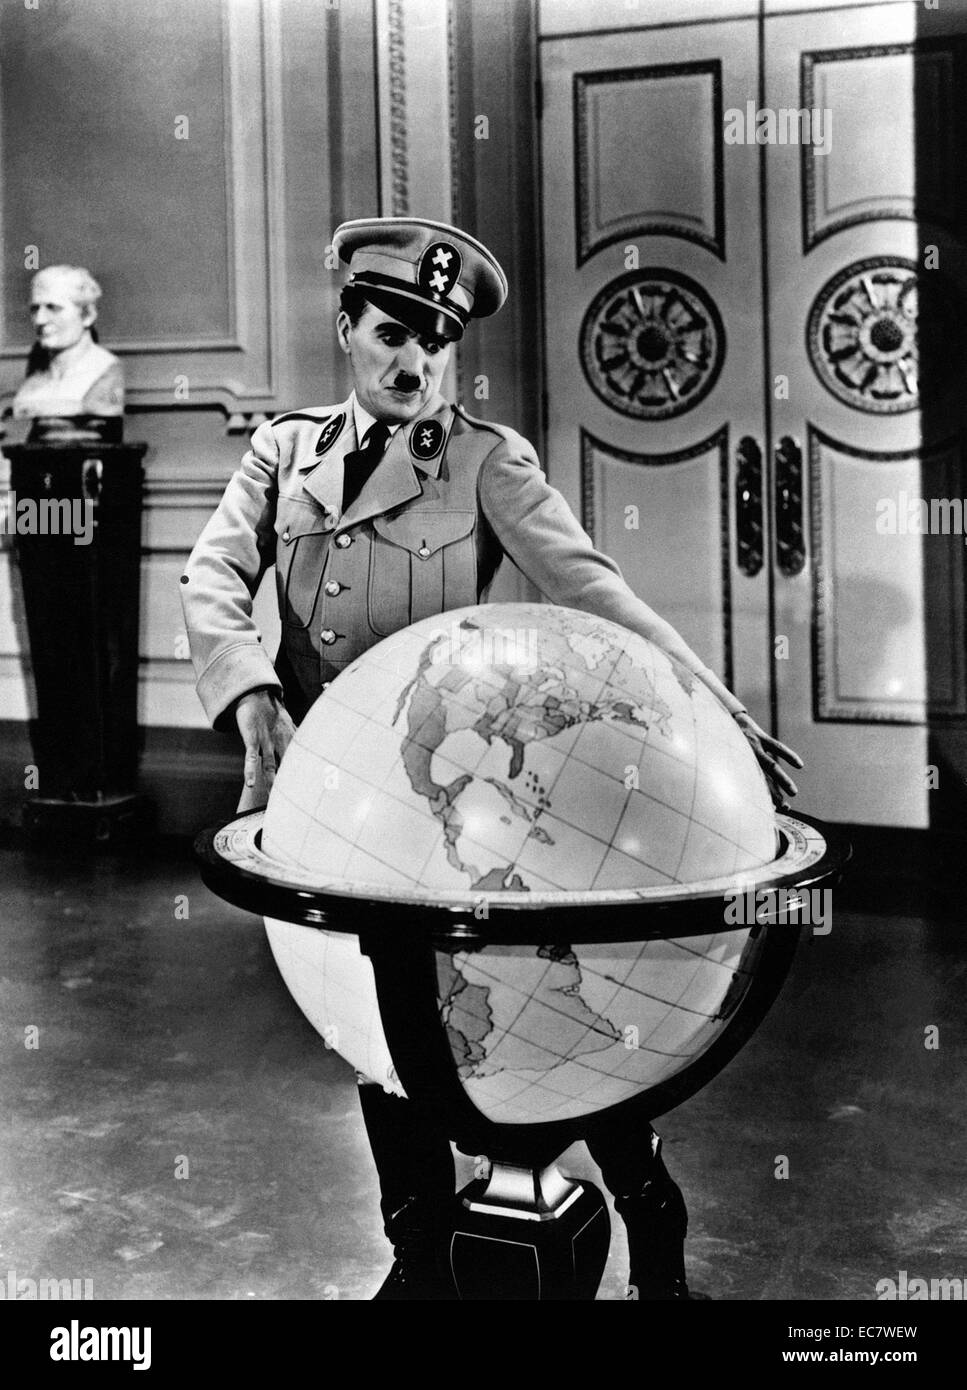 The Great Dictator Stock Photo